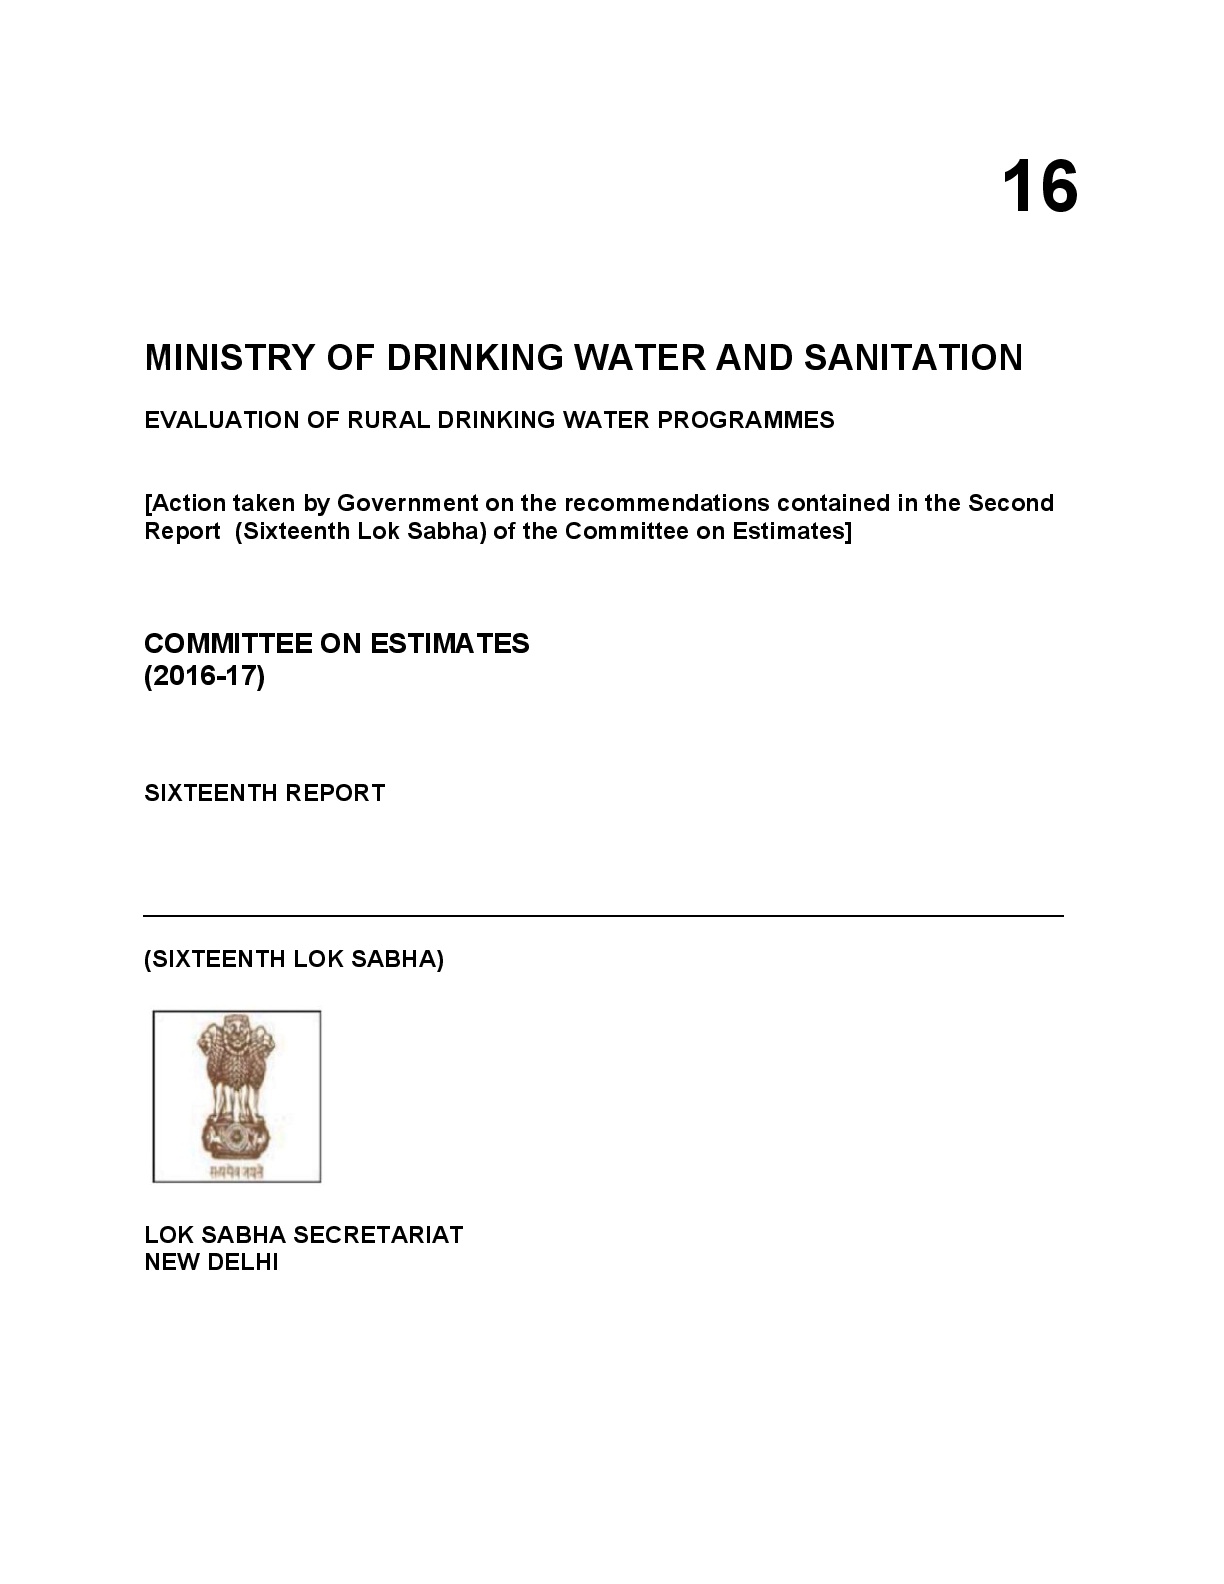 Evaluation of Rural Drinking Water Programmes